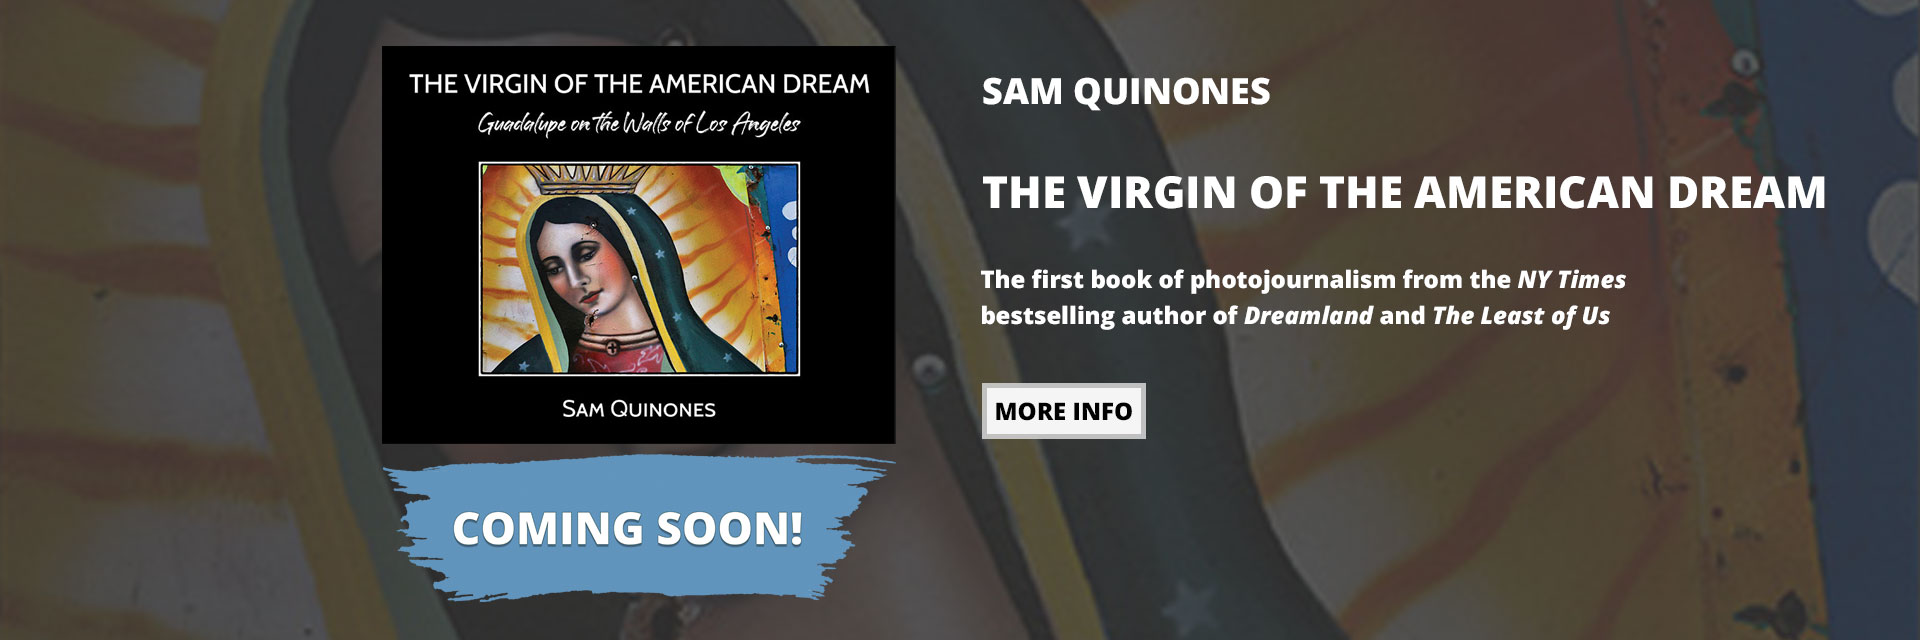 The Virgin of the American Dream